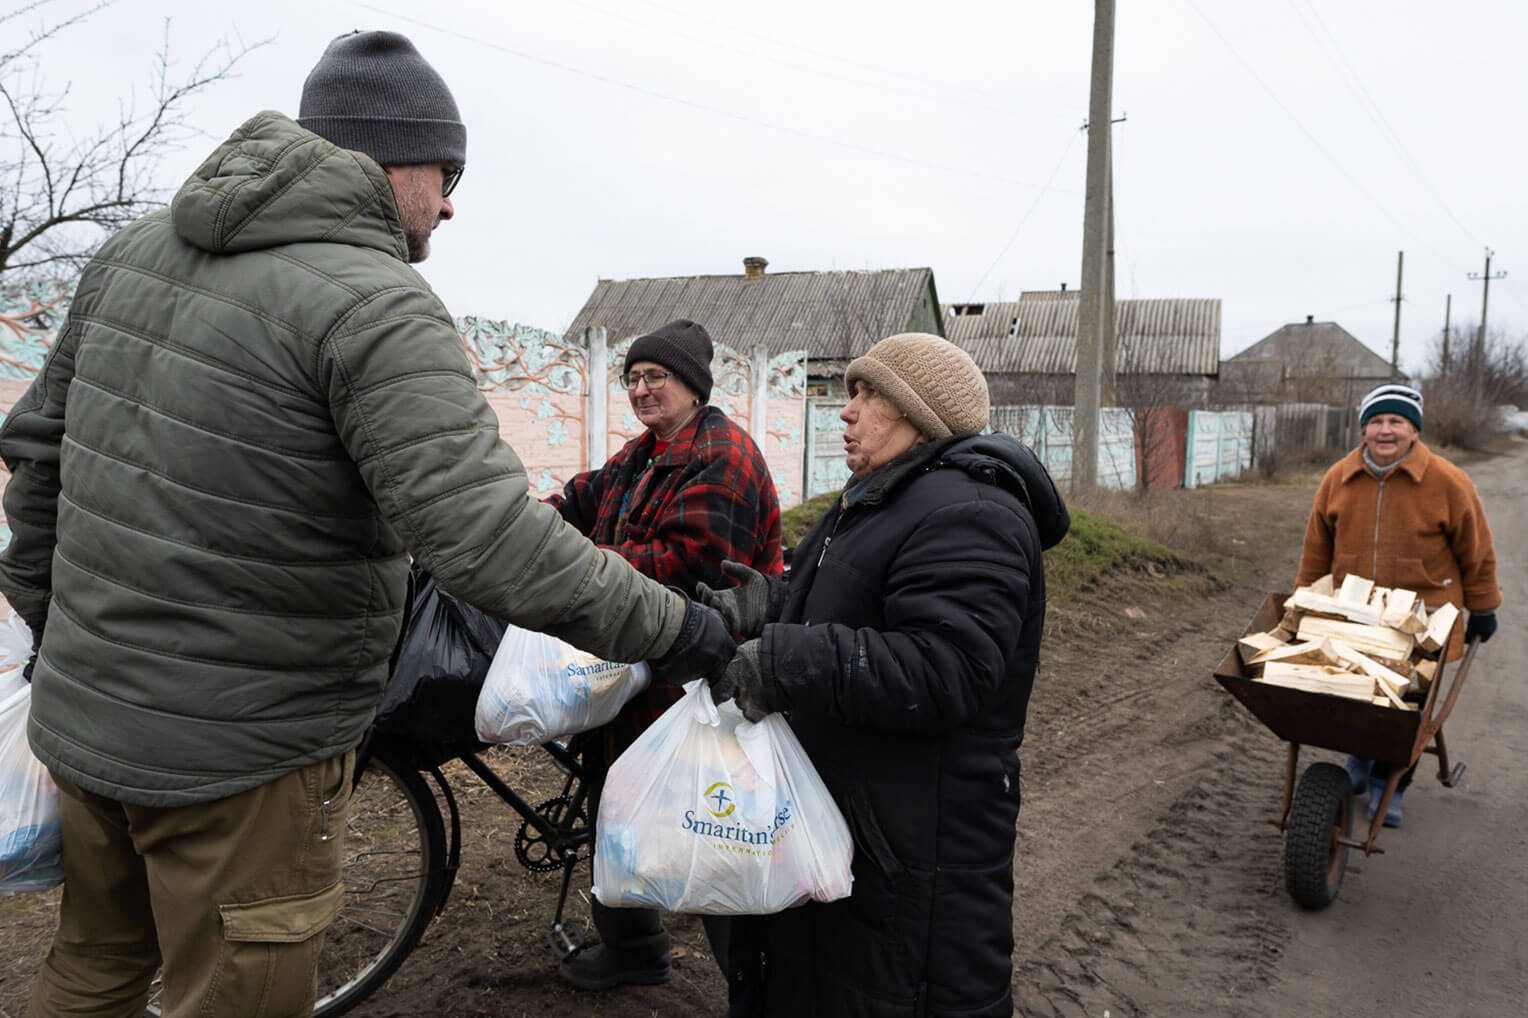 Samaritan's Purse is providing food to those in need here in eastern Ukraine.